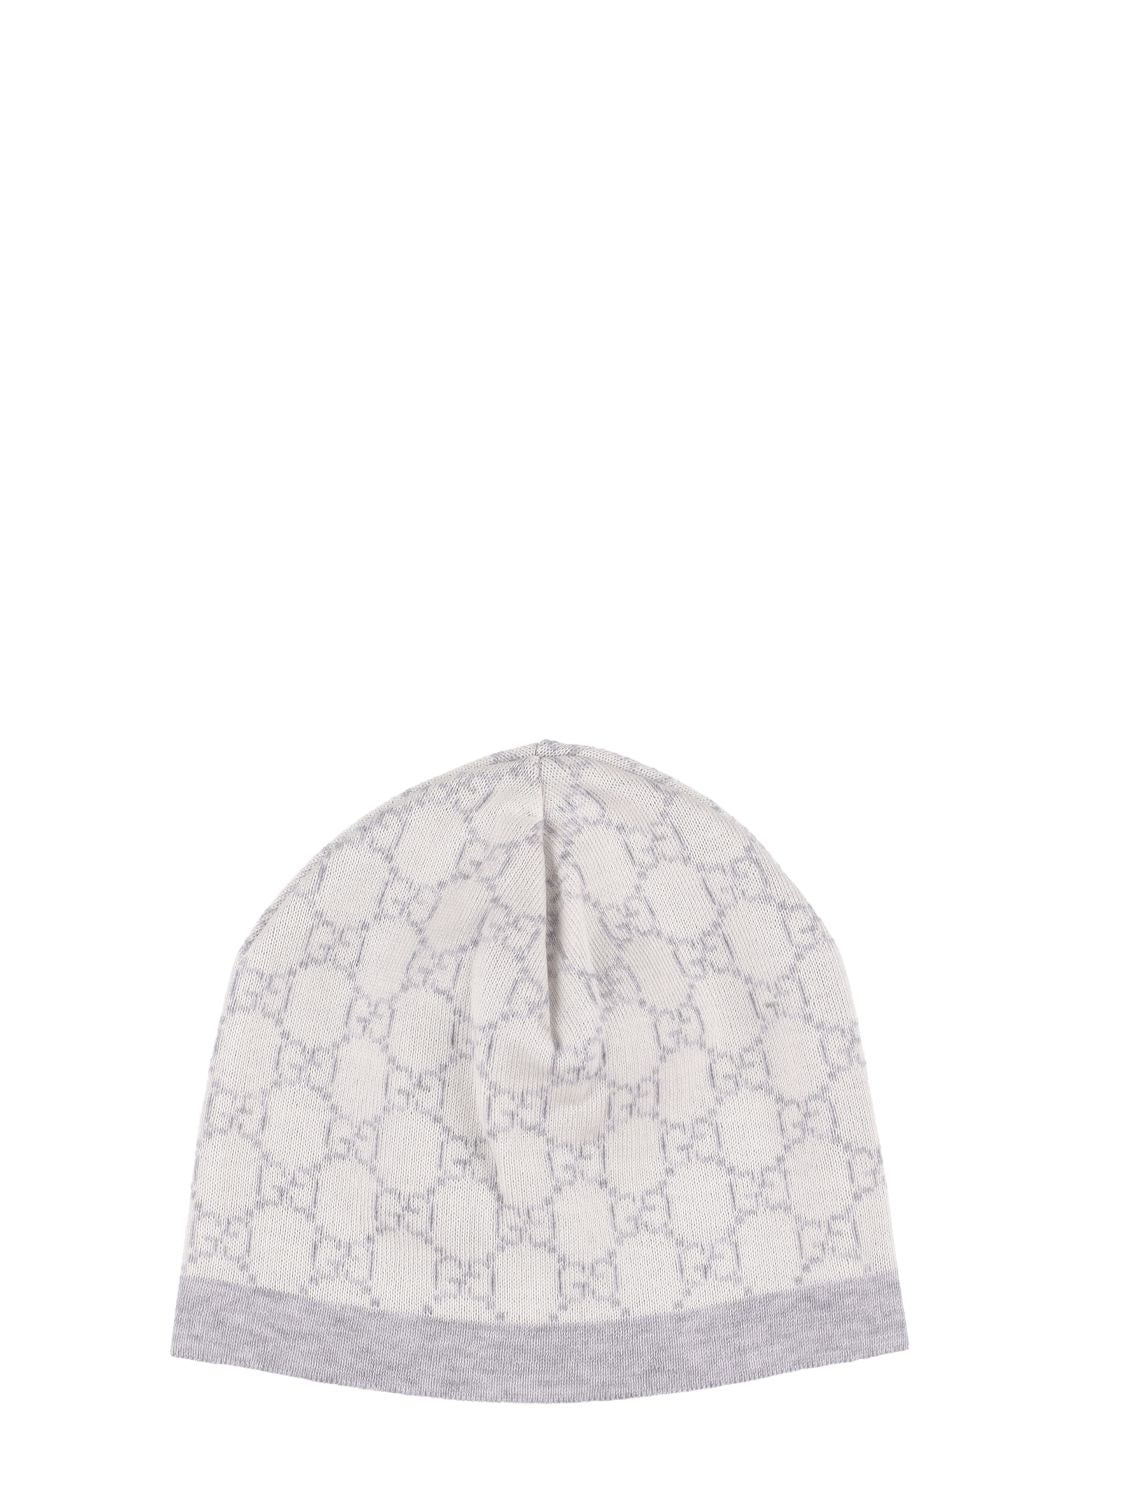 GUCCI: knit hat - White  Gucci girls' hats 7389463K111 online at